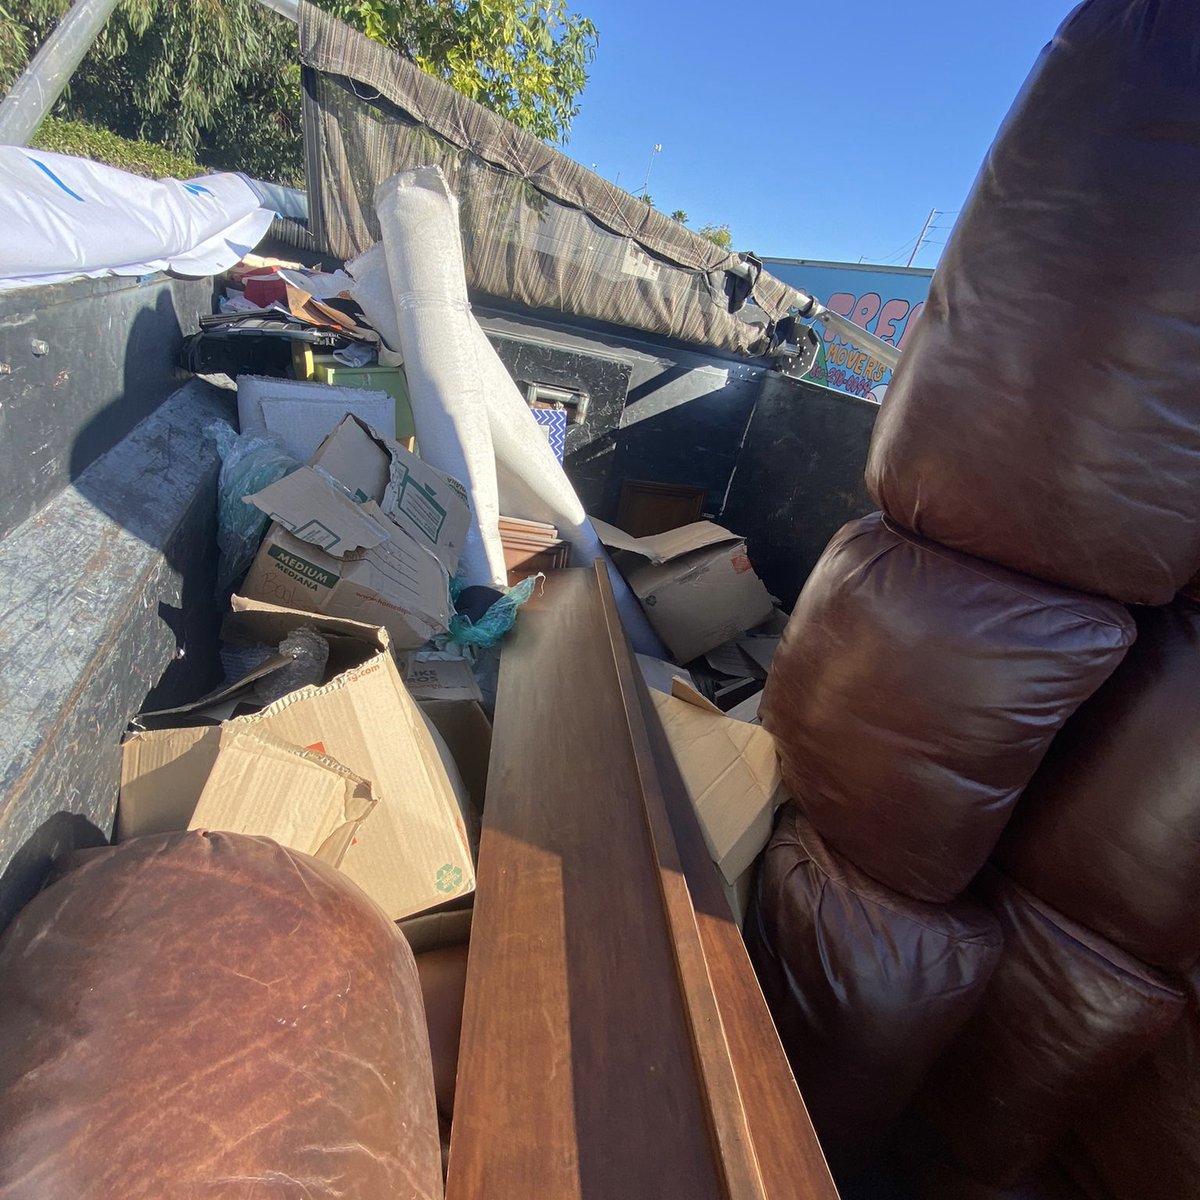 Ready to take back control of your space? Our junk removal services will help you reclaim your home and your peace of mind. 🗝️🏠 #TakeBackControl #ReclaimYourSpace #JunkRemovalServices